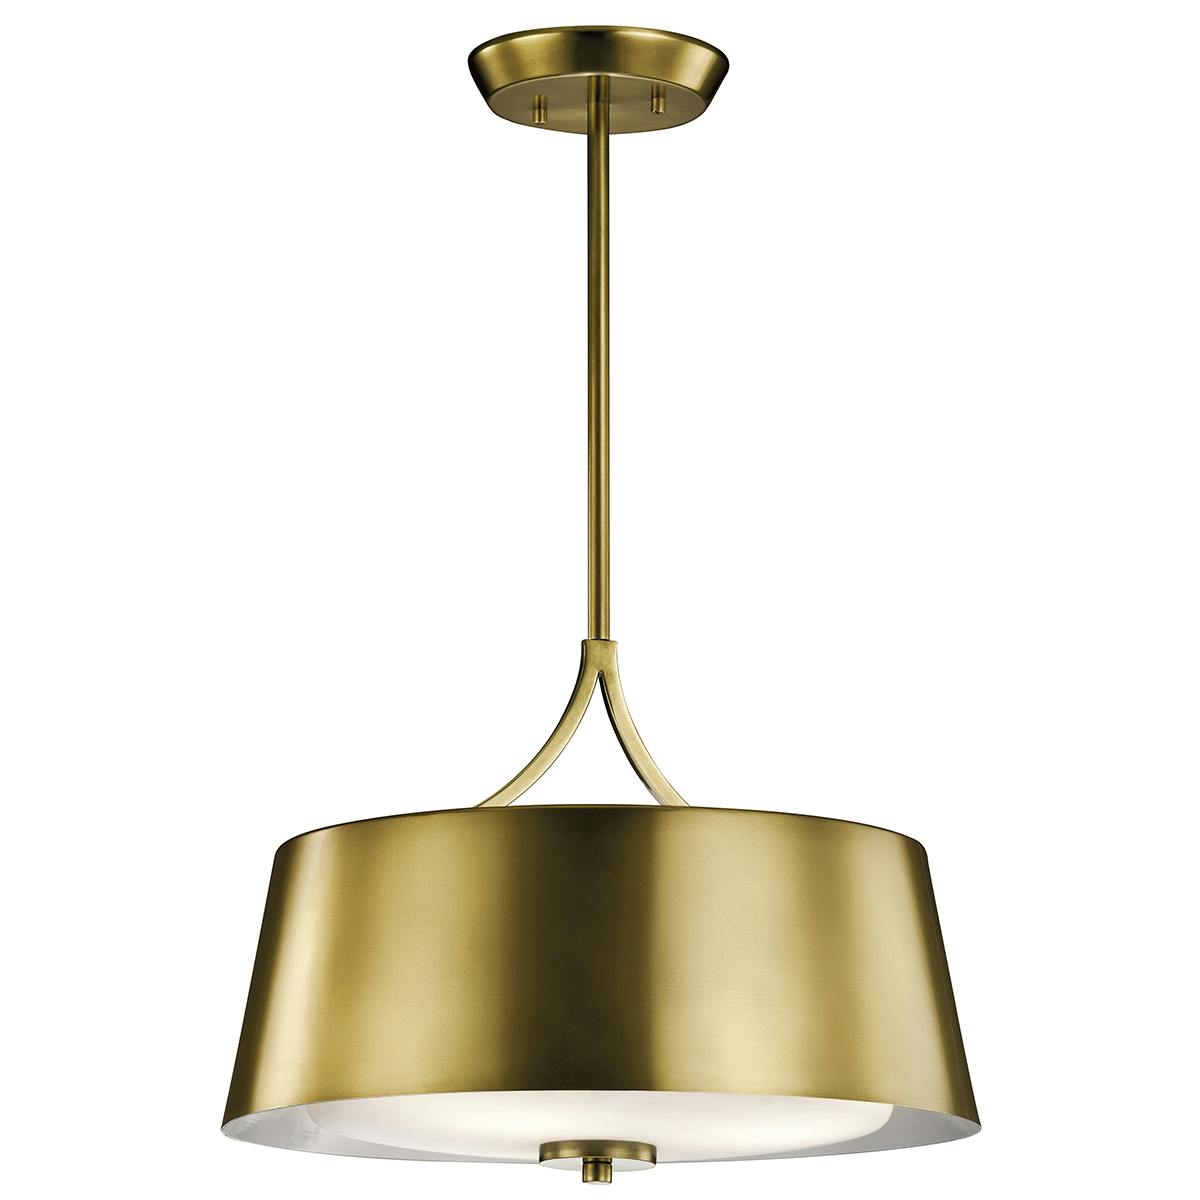 Maclain 16" Convertible Pendant Bronze on a white background